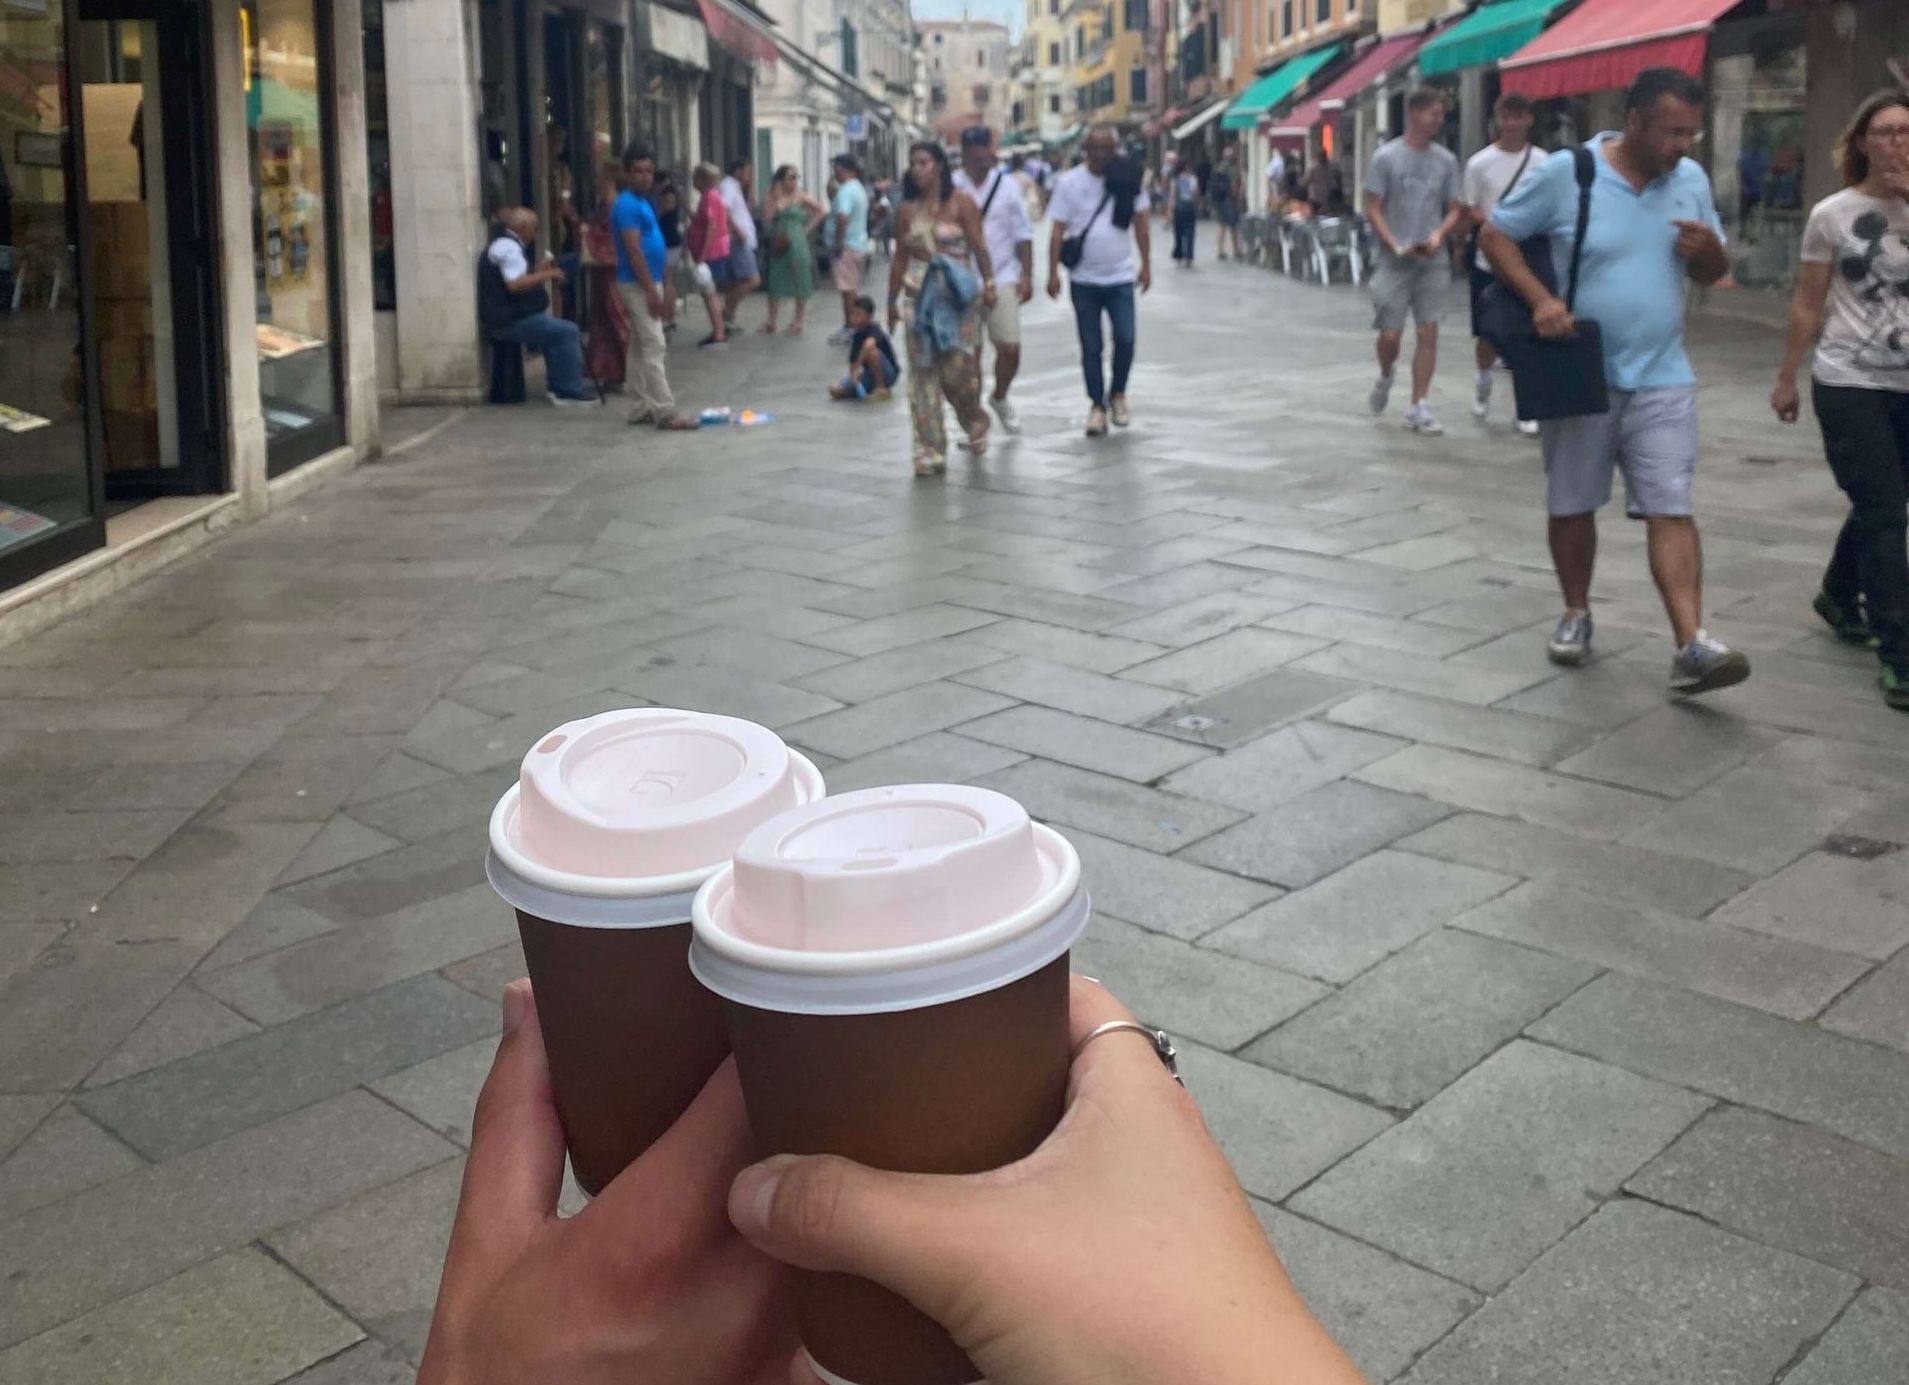 Walking down the street with coffee.